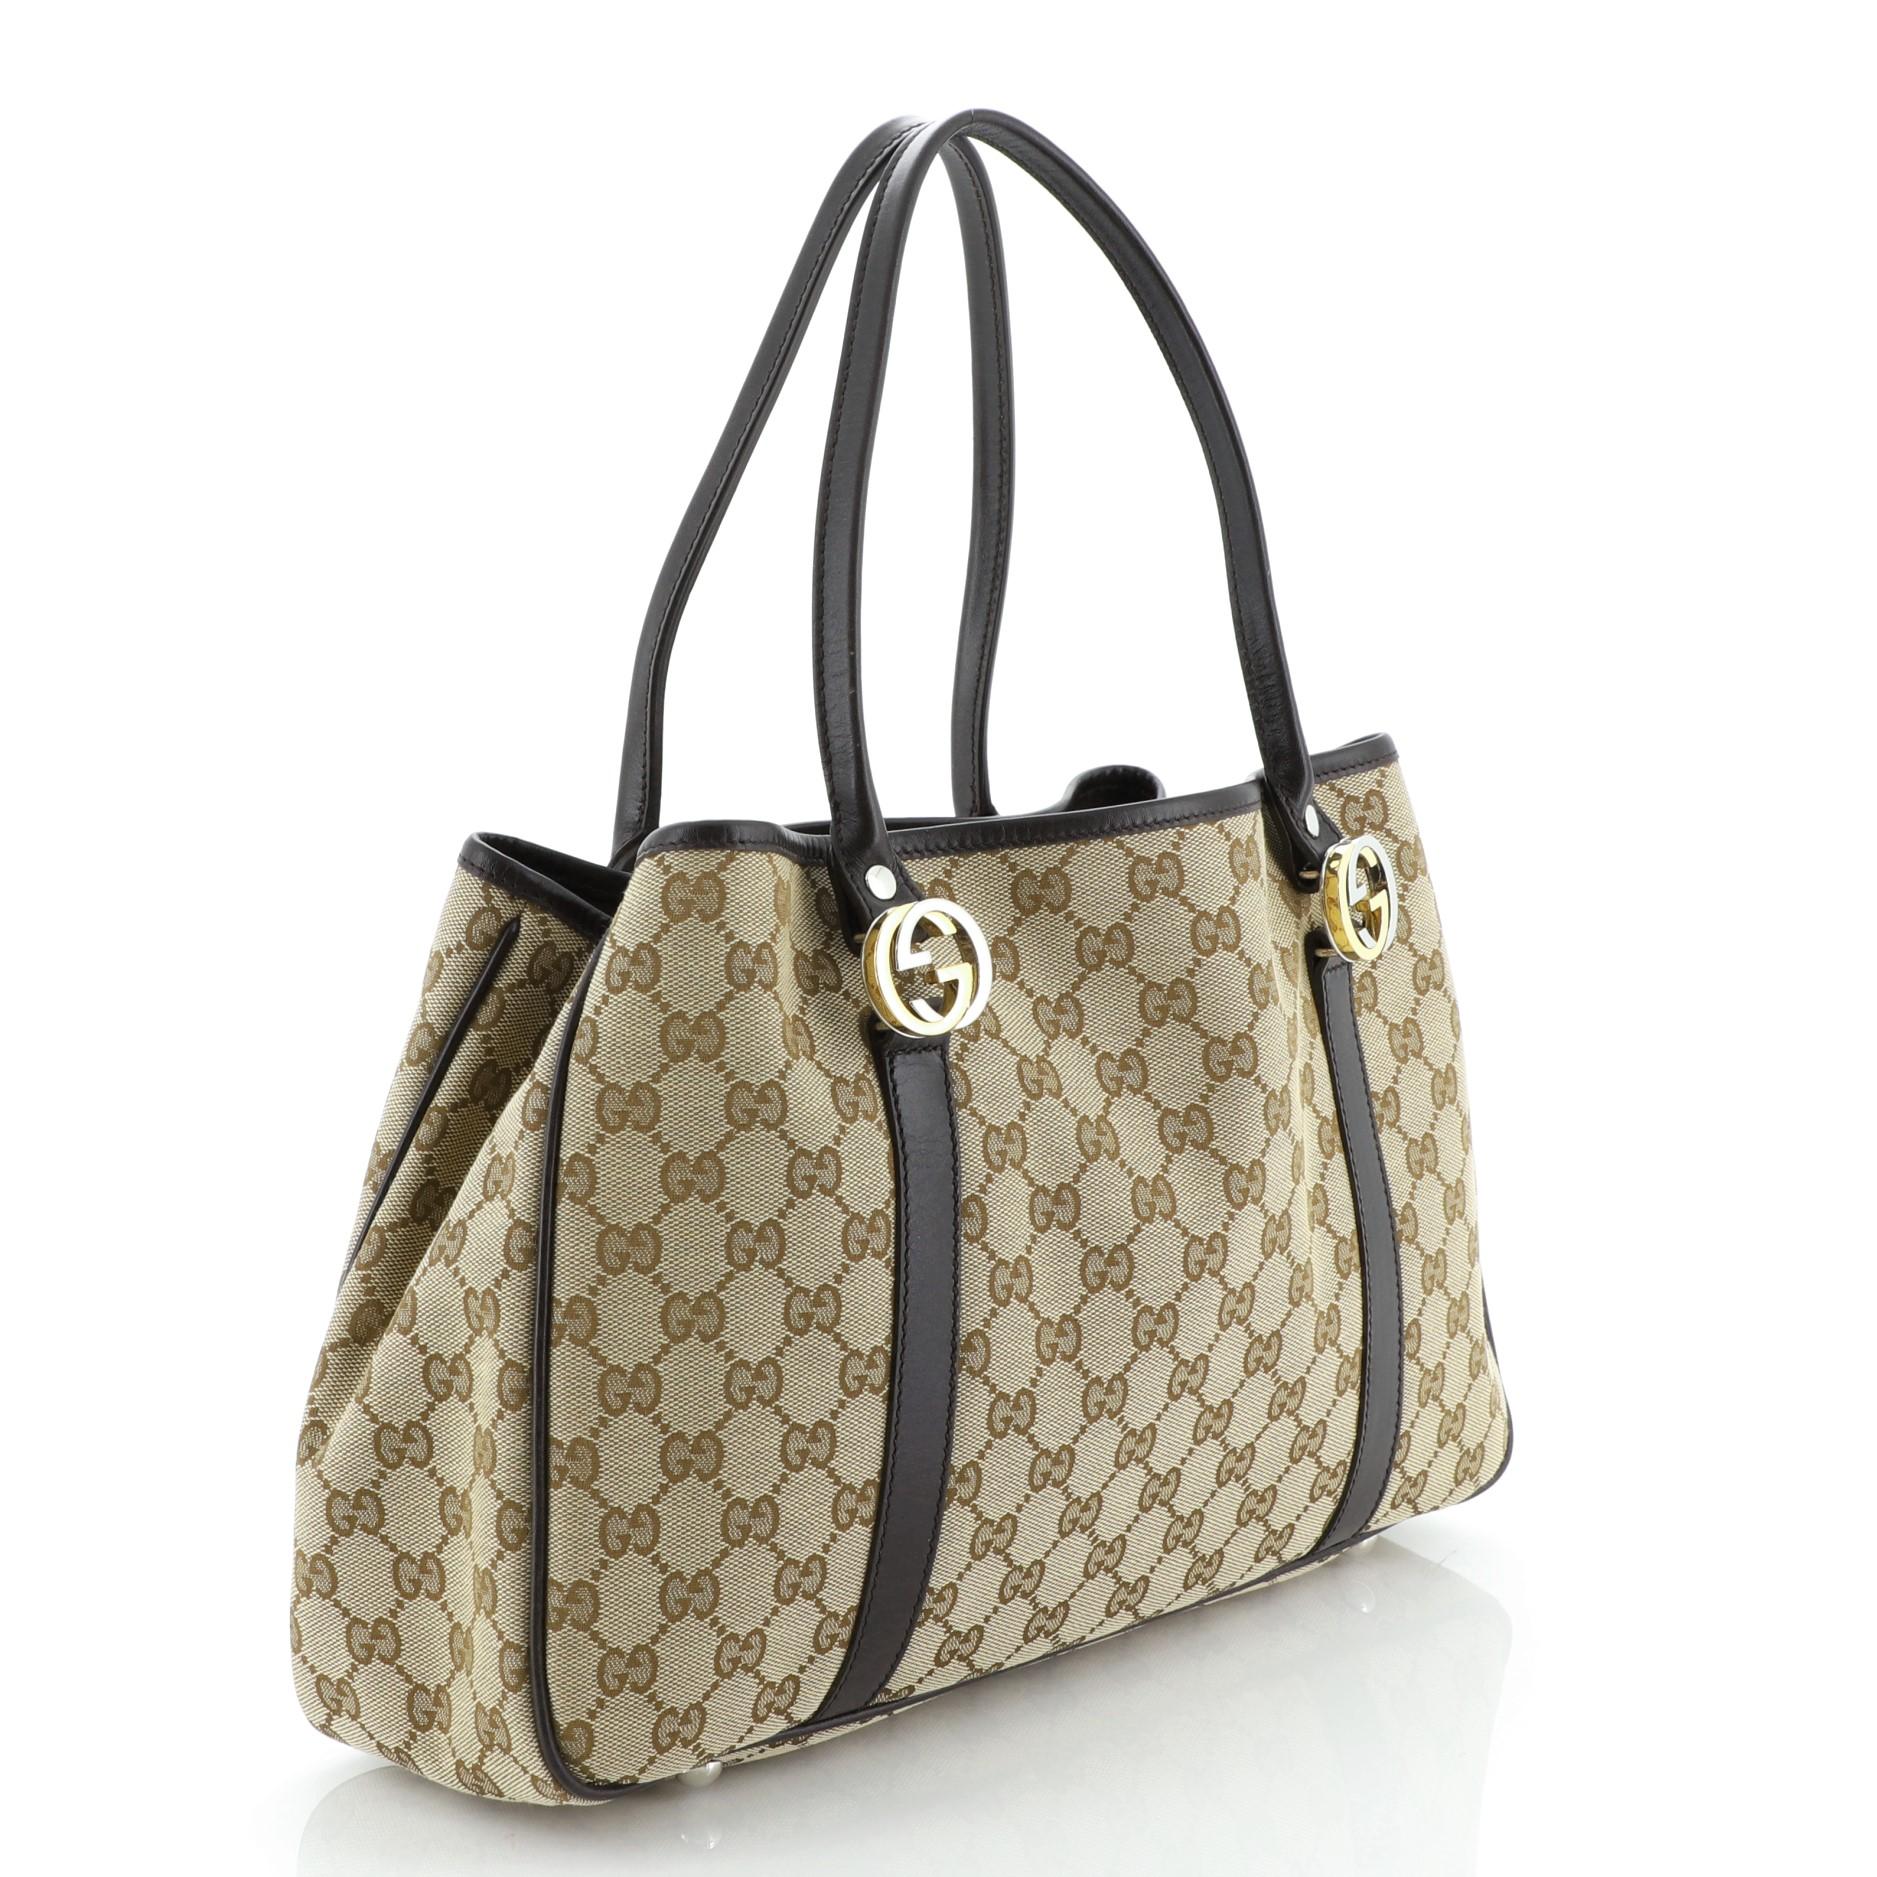 This Gucci Twins Tote GG Canvas Medium, crafted from brown GG canvas, features dual tall handles with interlocking GG logo hardware, leather trim, and gold and silver-tone hardware. It opens to a brown fabric interior with side zip and slip pockets.